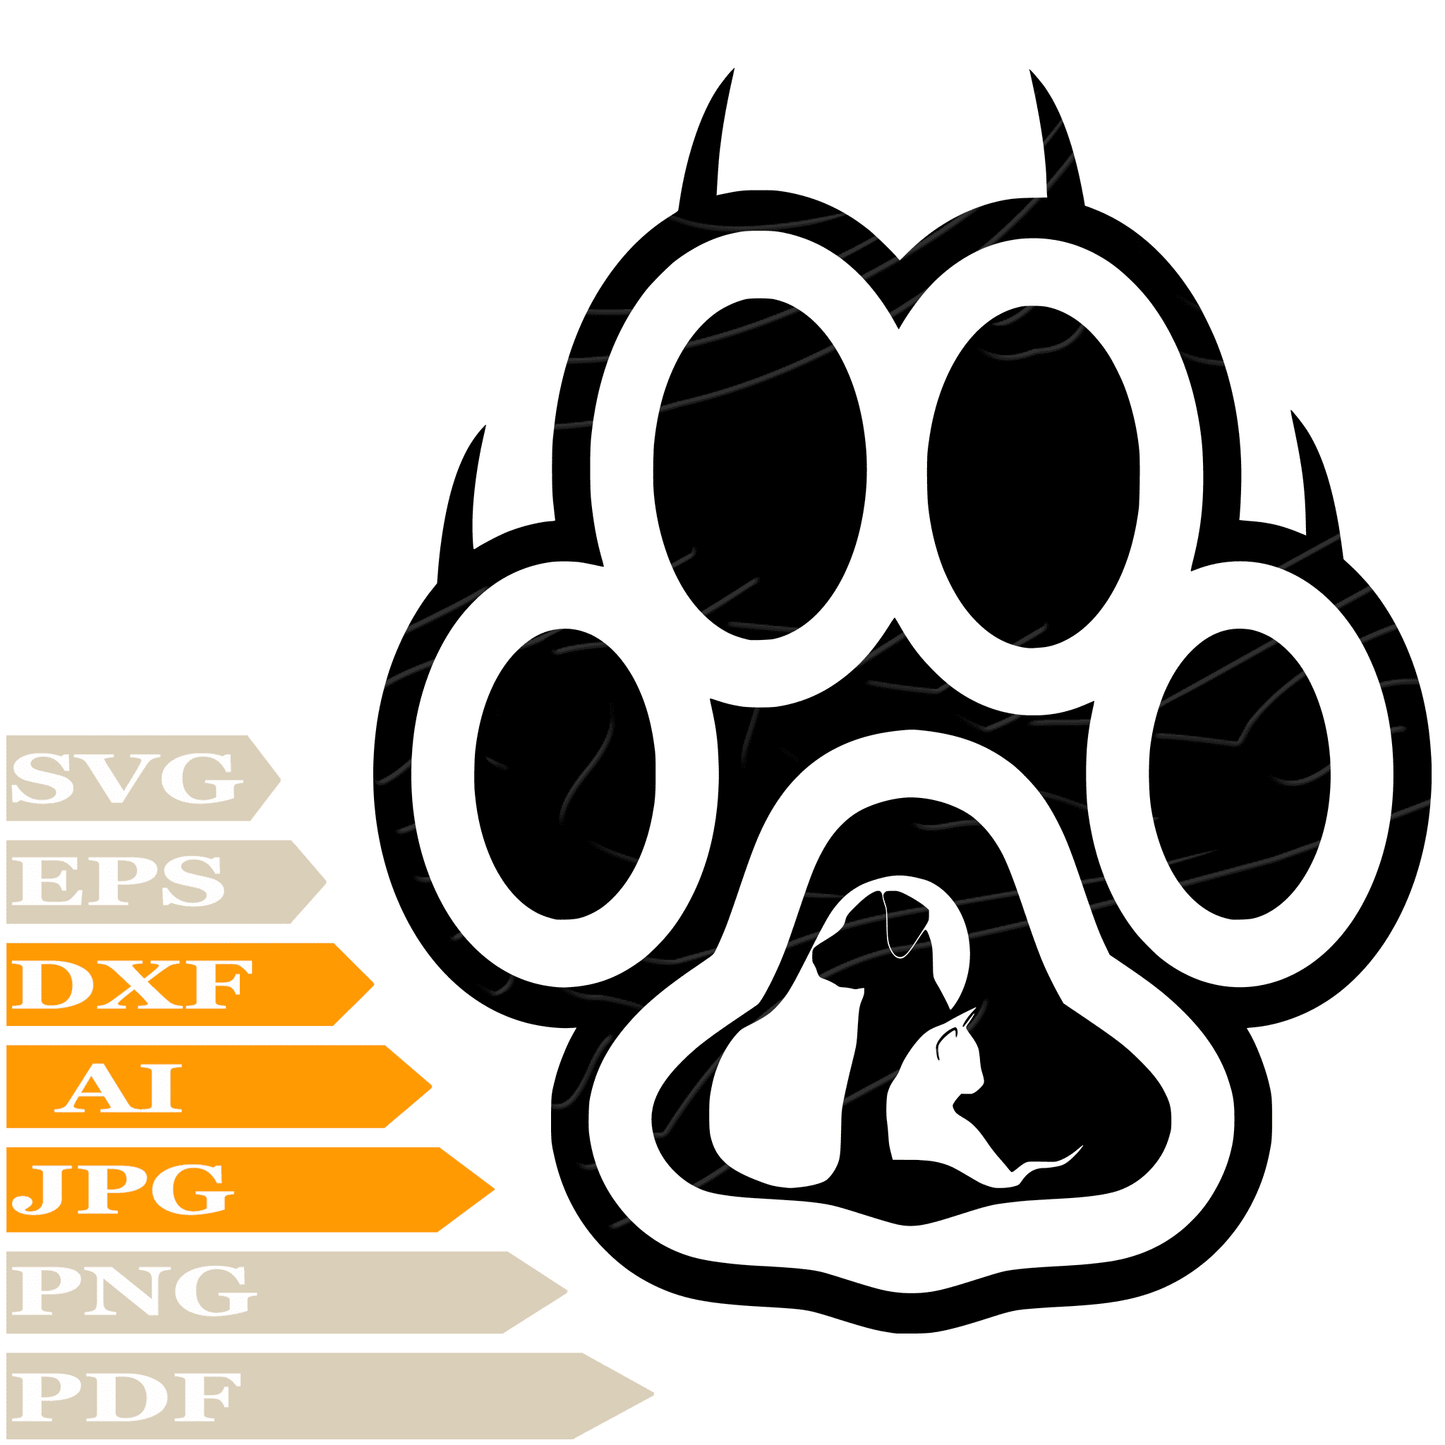 Paw SVG File, Dog Paw SVG Design, Dog And Cat SVG, Dog Paw Vector Graphics, Dog Cat PNG, For Cricut, Clipart, Cut File, Print, Digital Download, T-Shirt, Silhouette